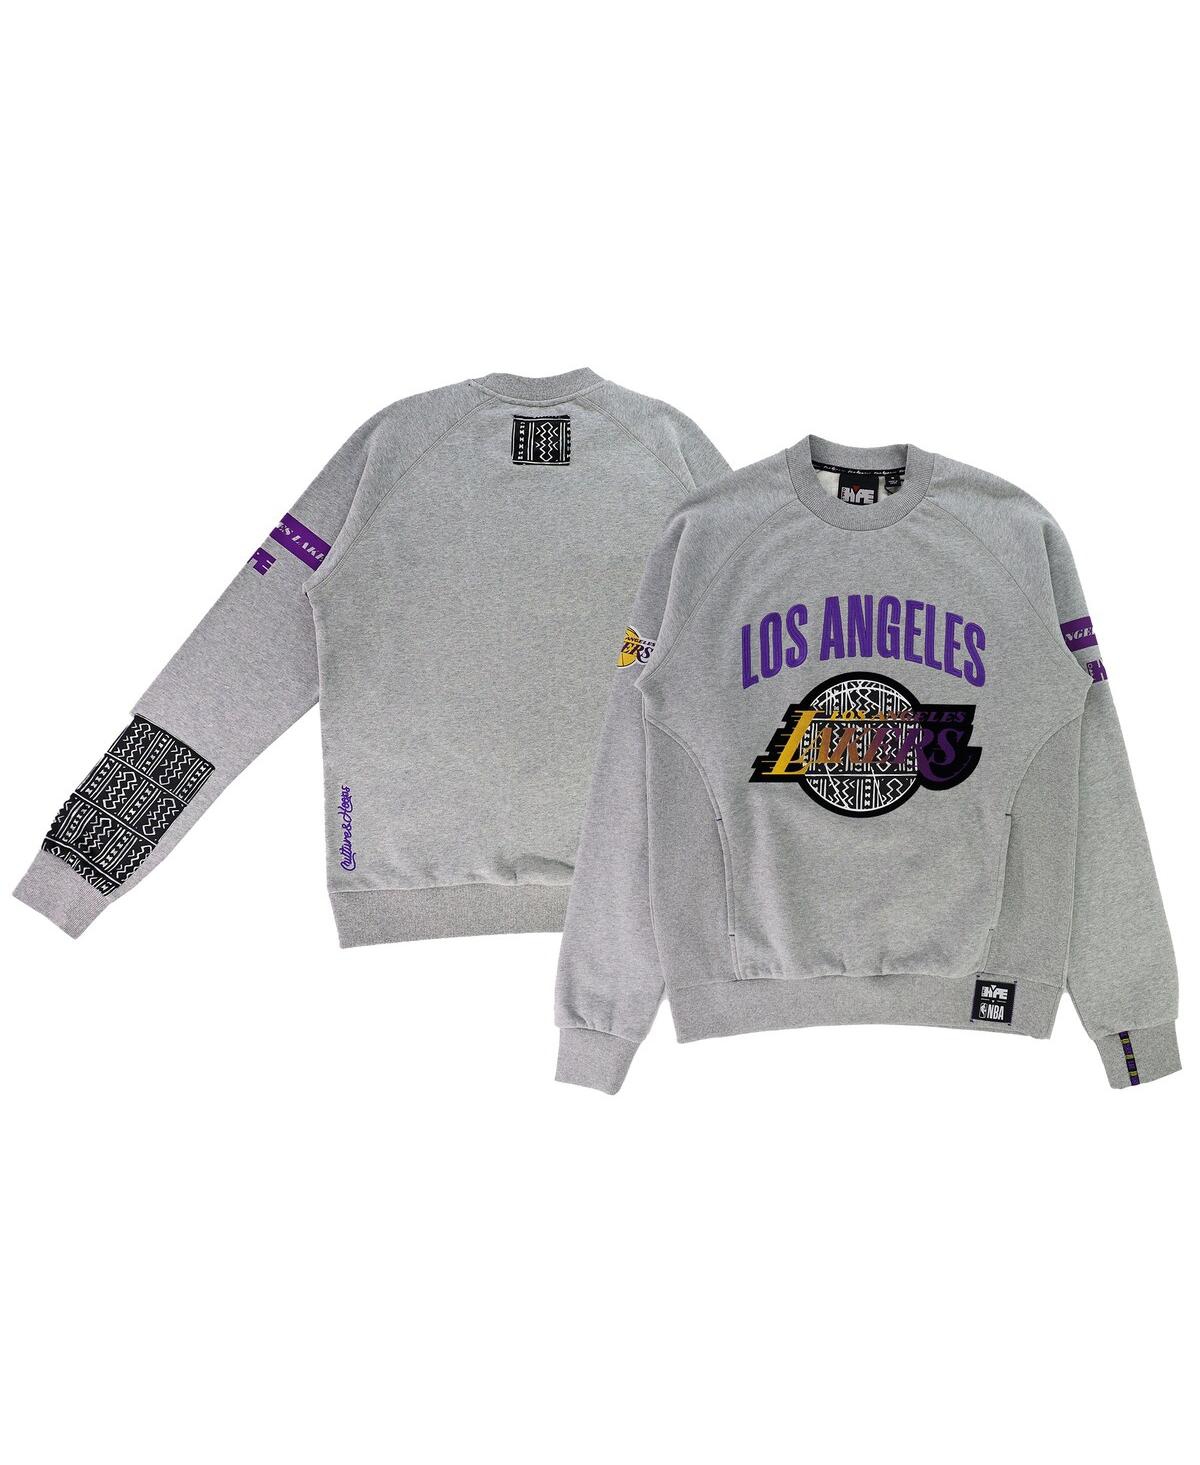 Men's and Women's Nba x Two Hype Heather Gray Los Angeles Lakers Culture & Hoops Heavyweight Pullover Sweatshirt - Heather Gray